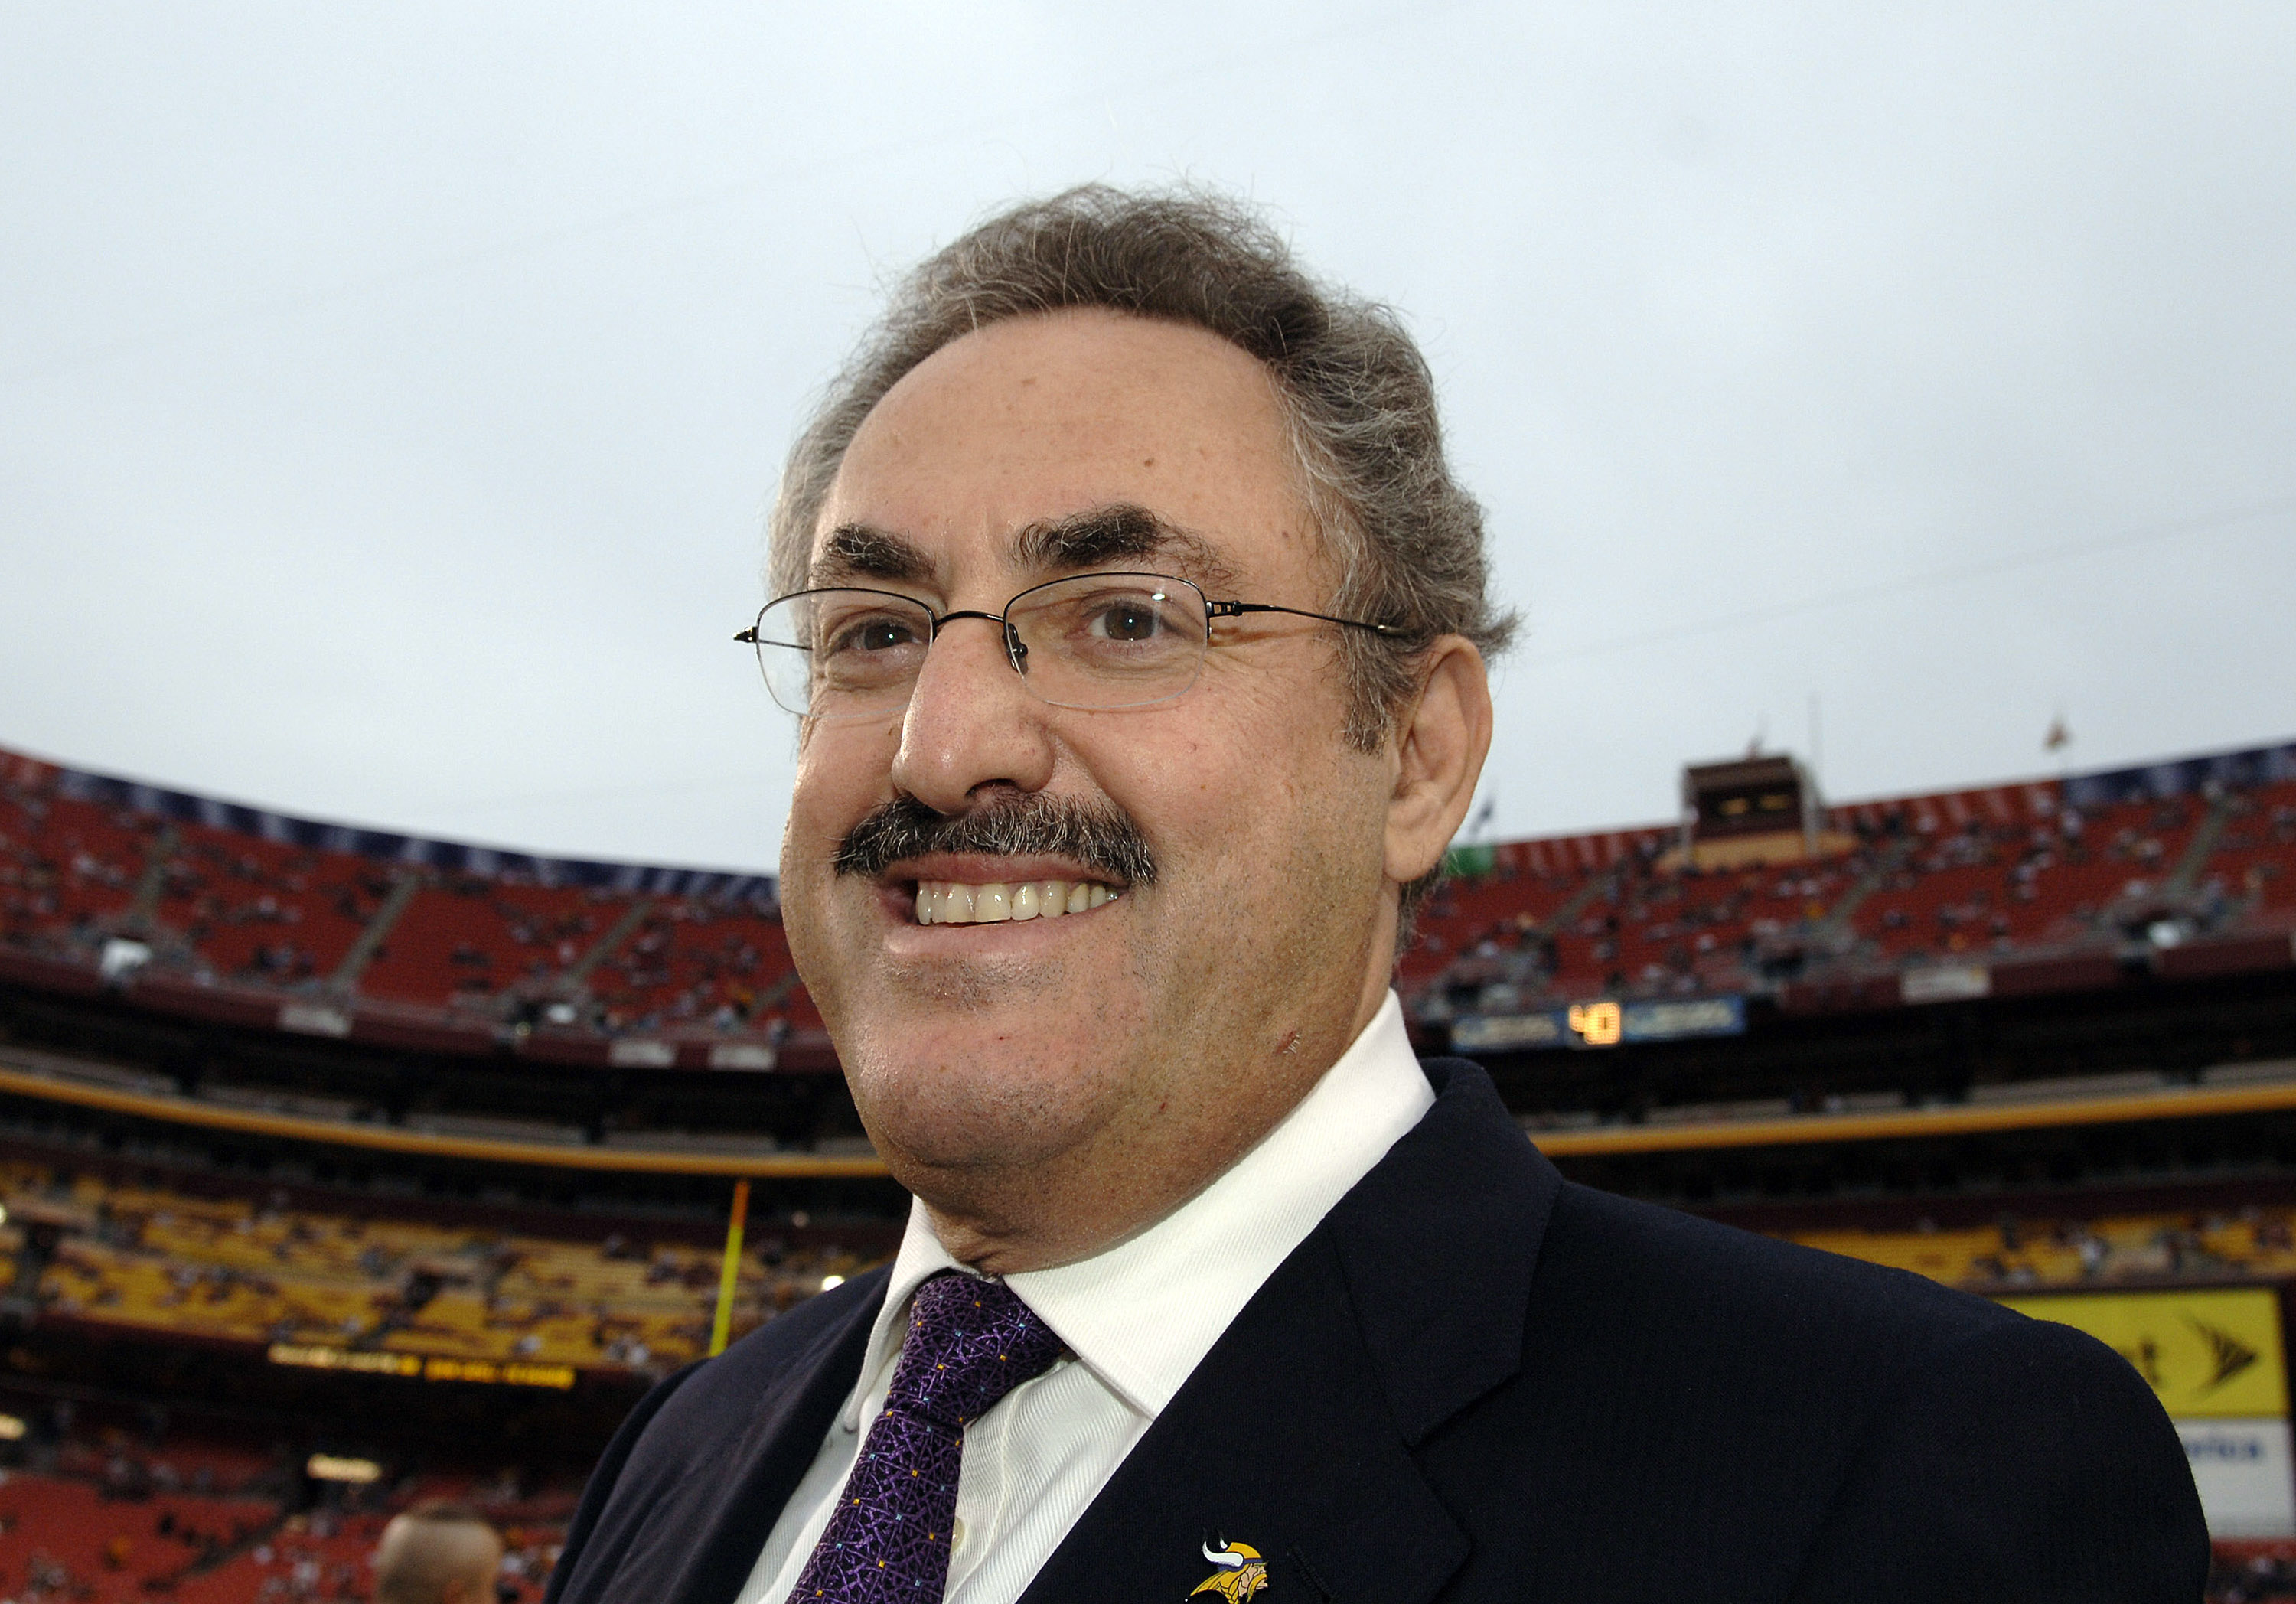 Minnesota Vikings owner Zygi Wilf on the field before  ESPN Monday Night Football September 11, 2006 in Washington.  The Minnesota  Vikings defeated the Redskins  19 - 16.  (Photo by Al Messerschmidt/Getty Images)